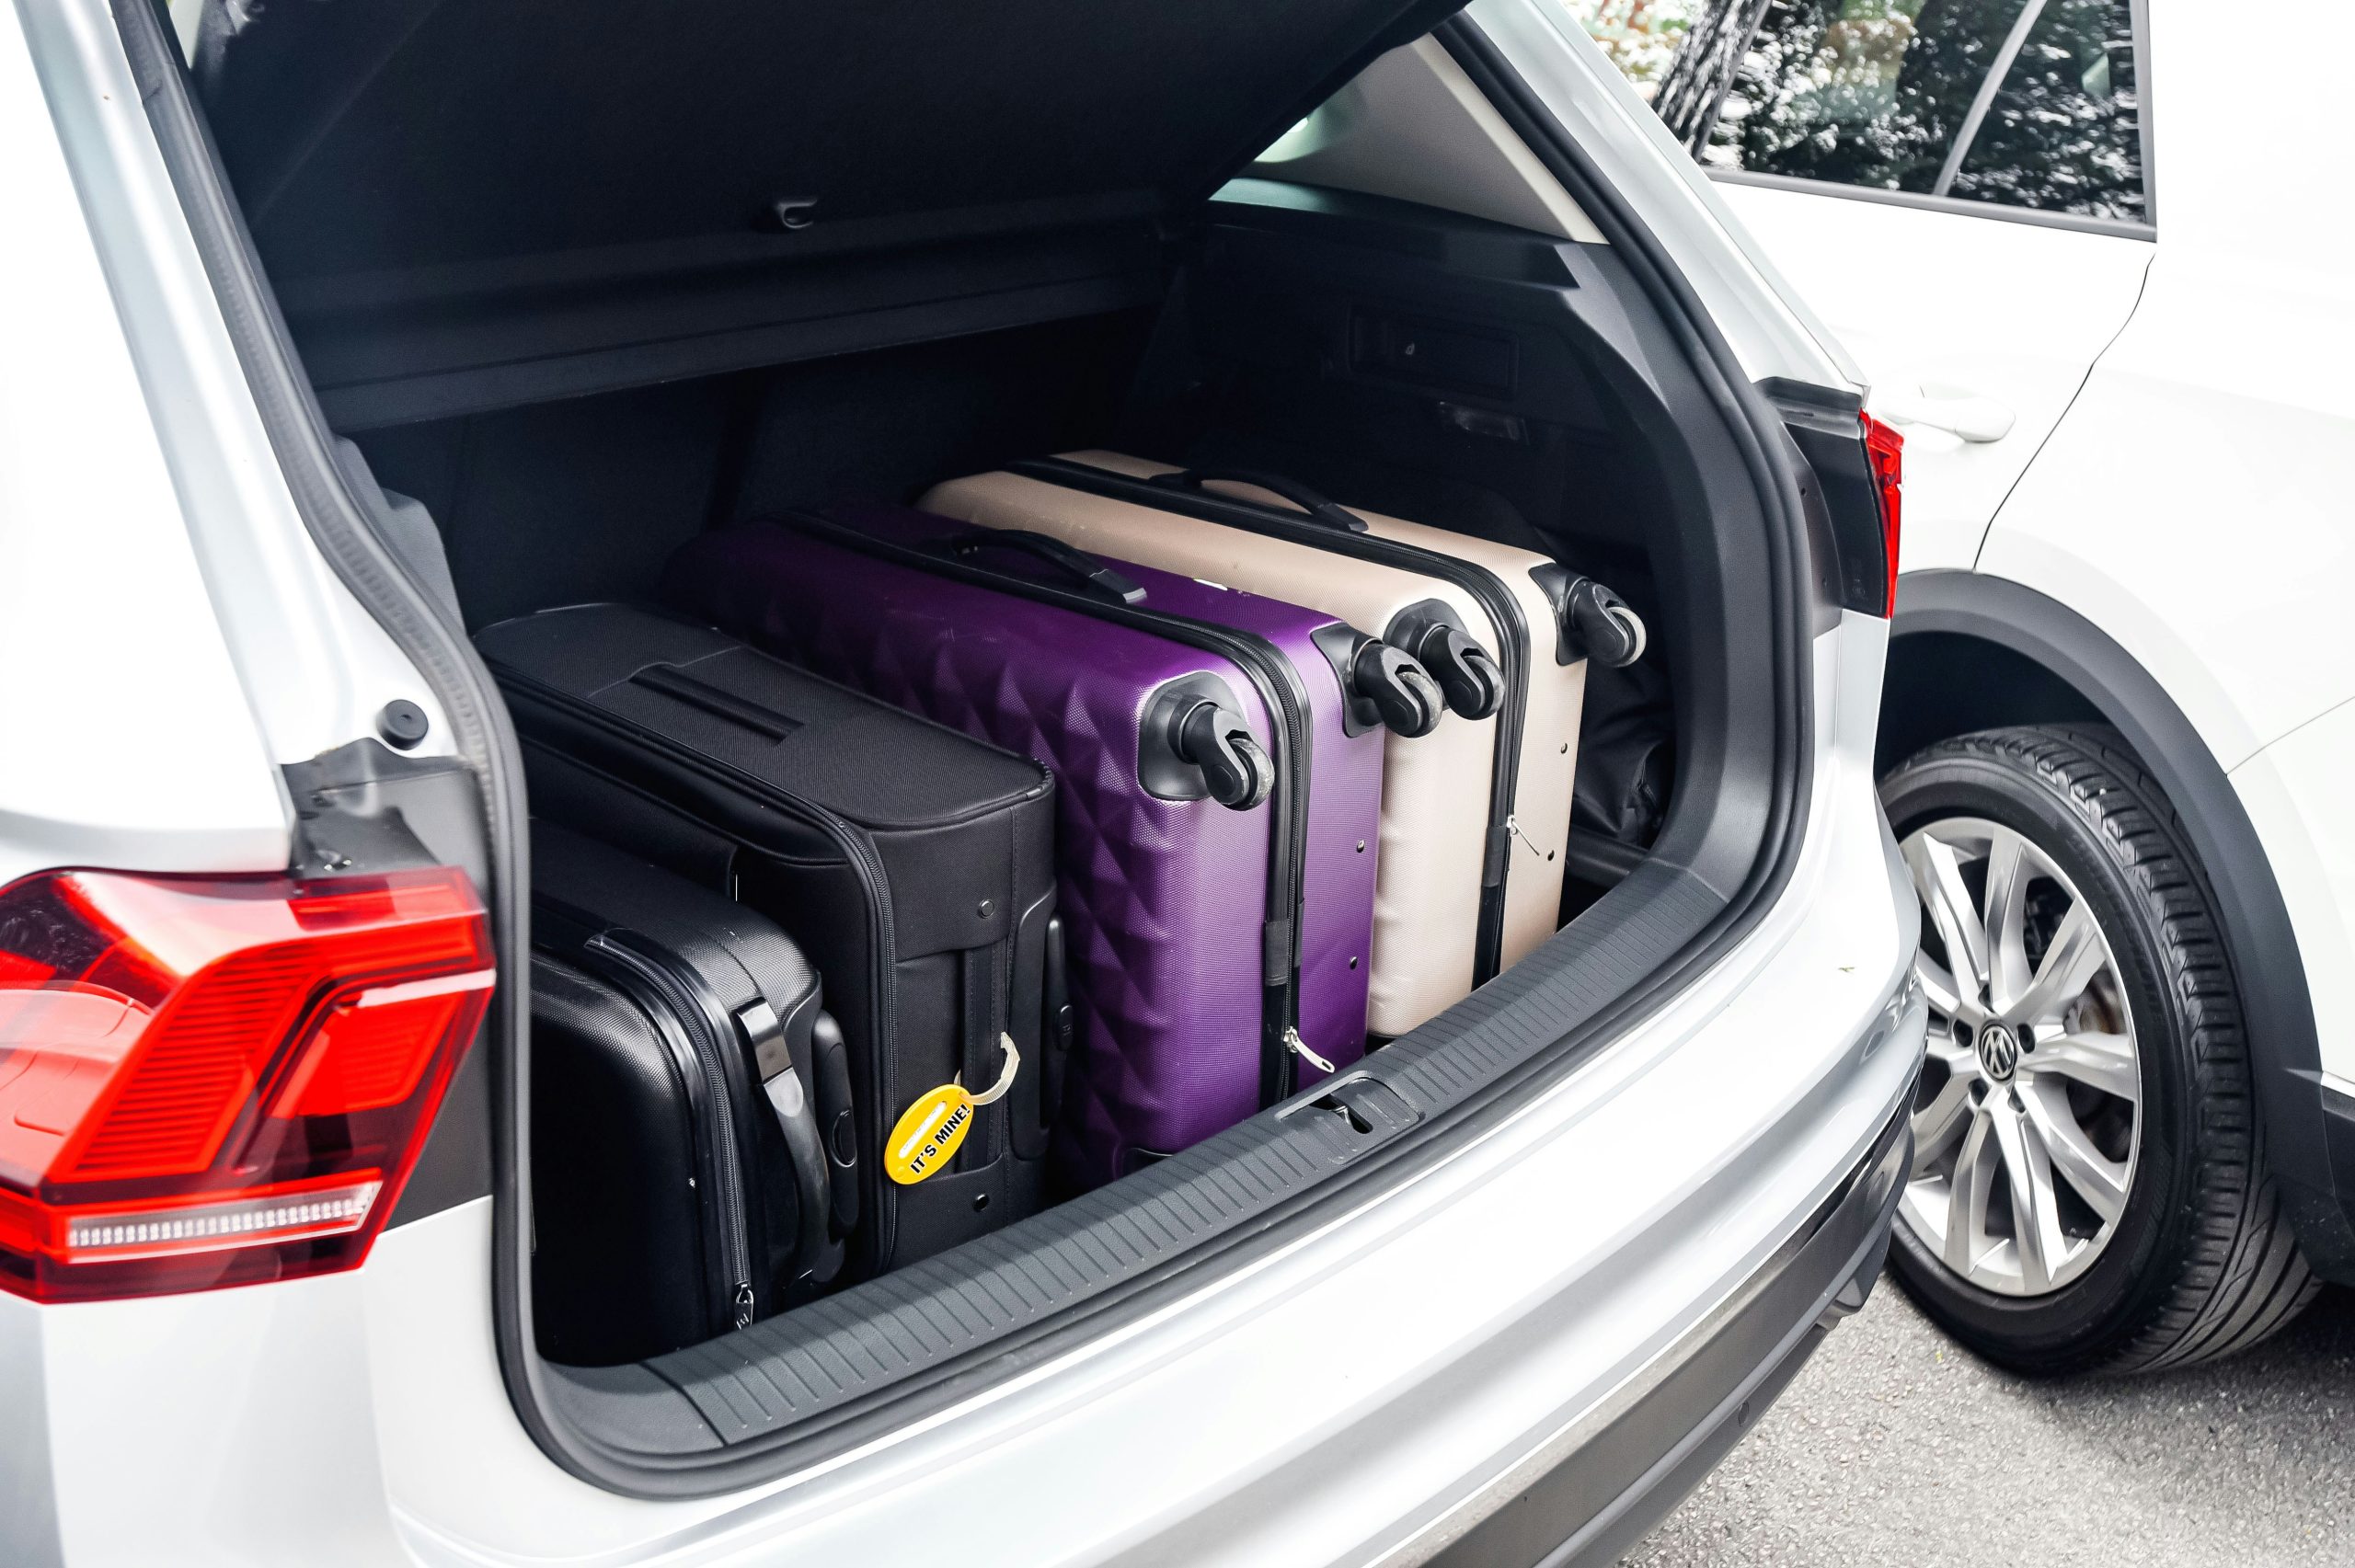 avoid these common luggage mistakes to travel hassle-free and stress-free. learn tips for packing and handling luggage for a smooth journey.